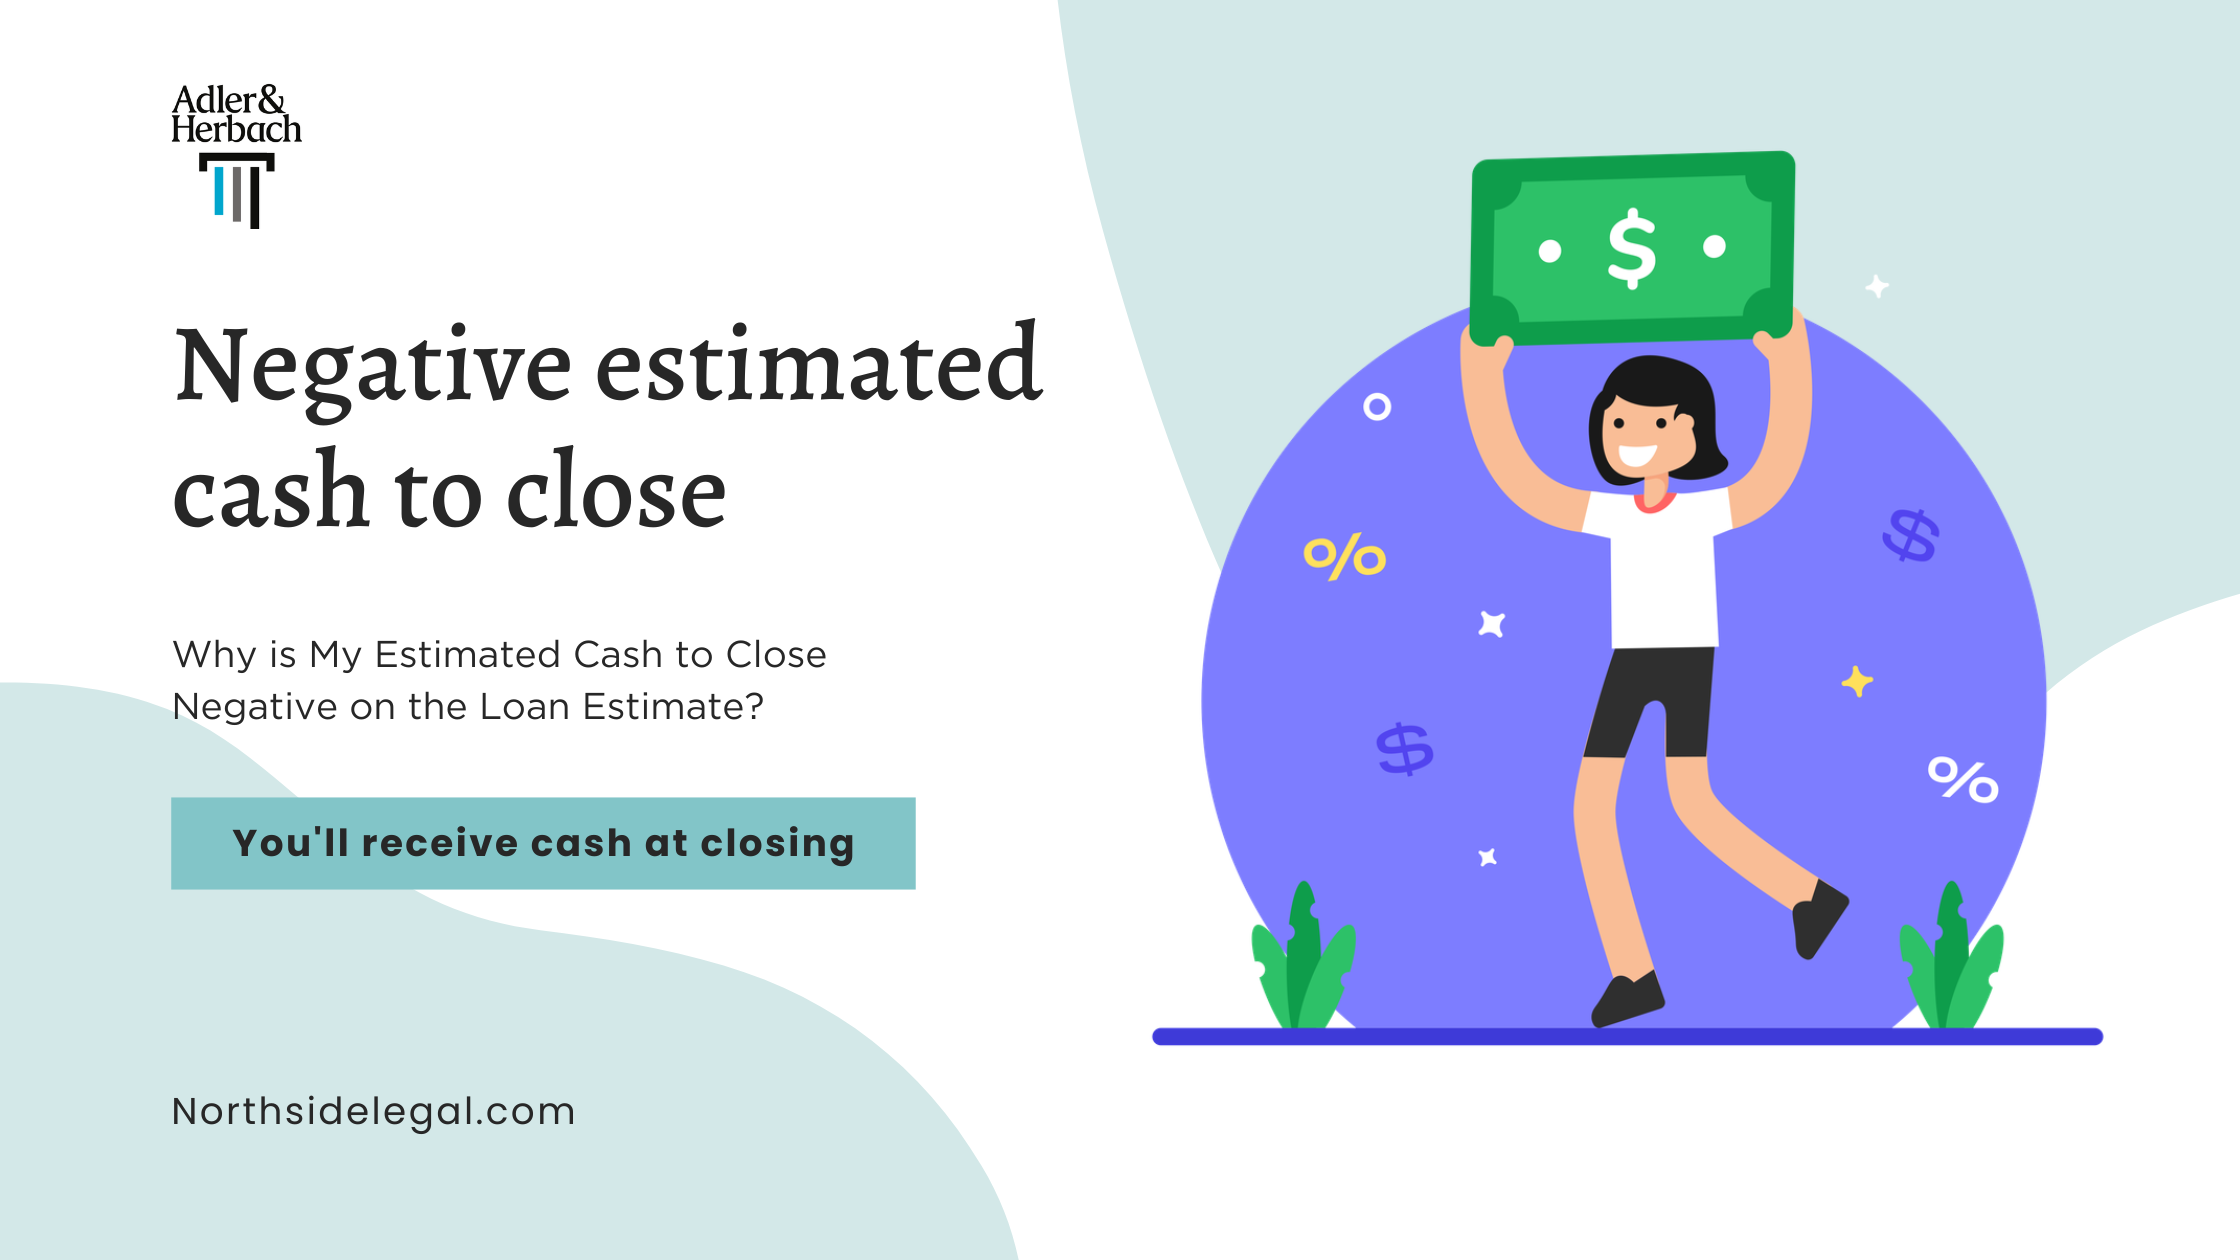 Why is My Estimated Cash to Close Negative on the Loan Estimate?